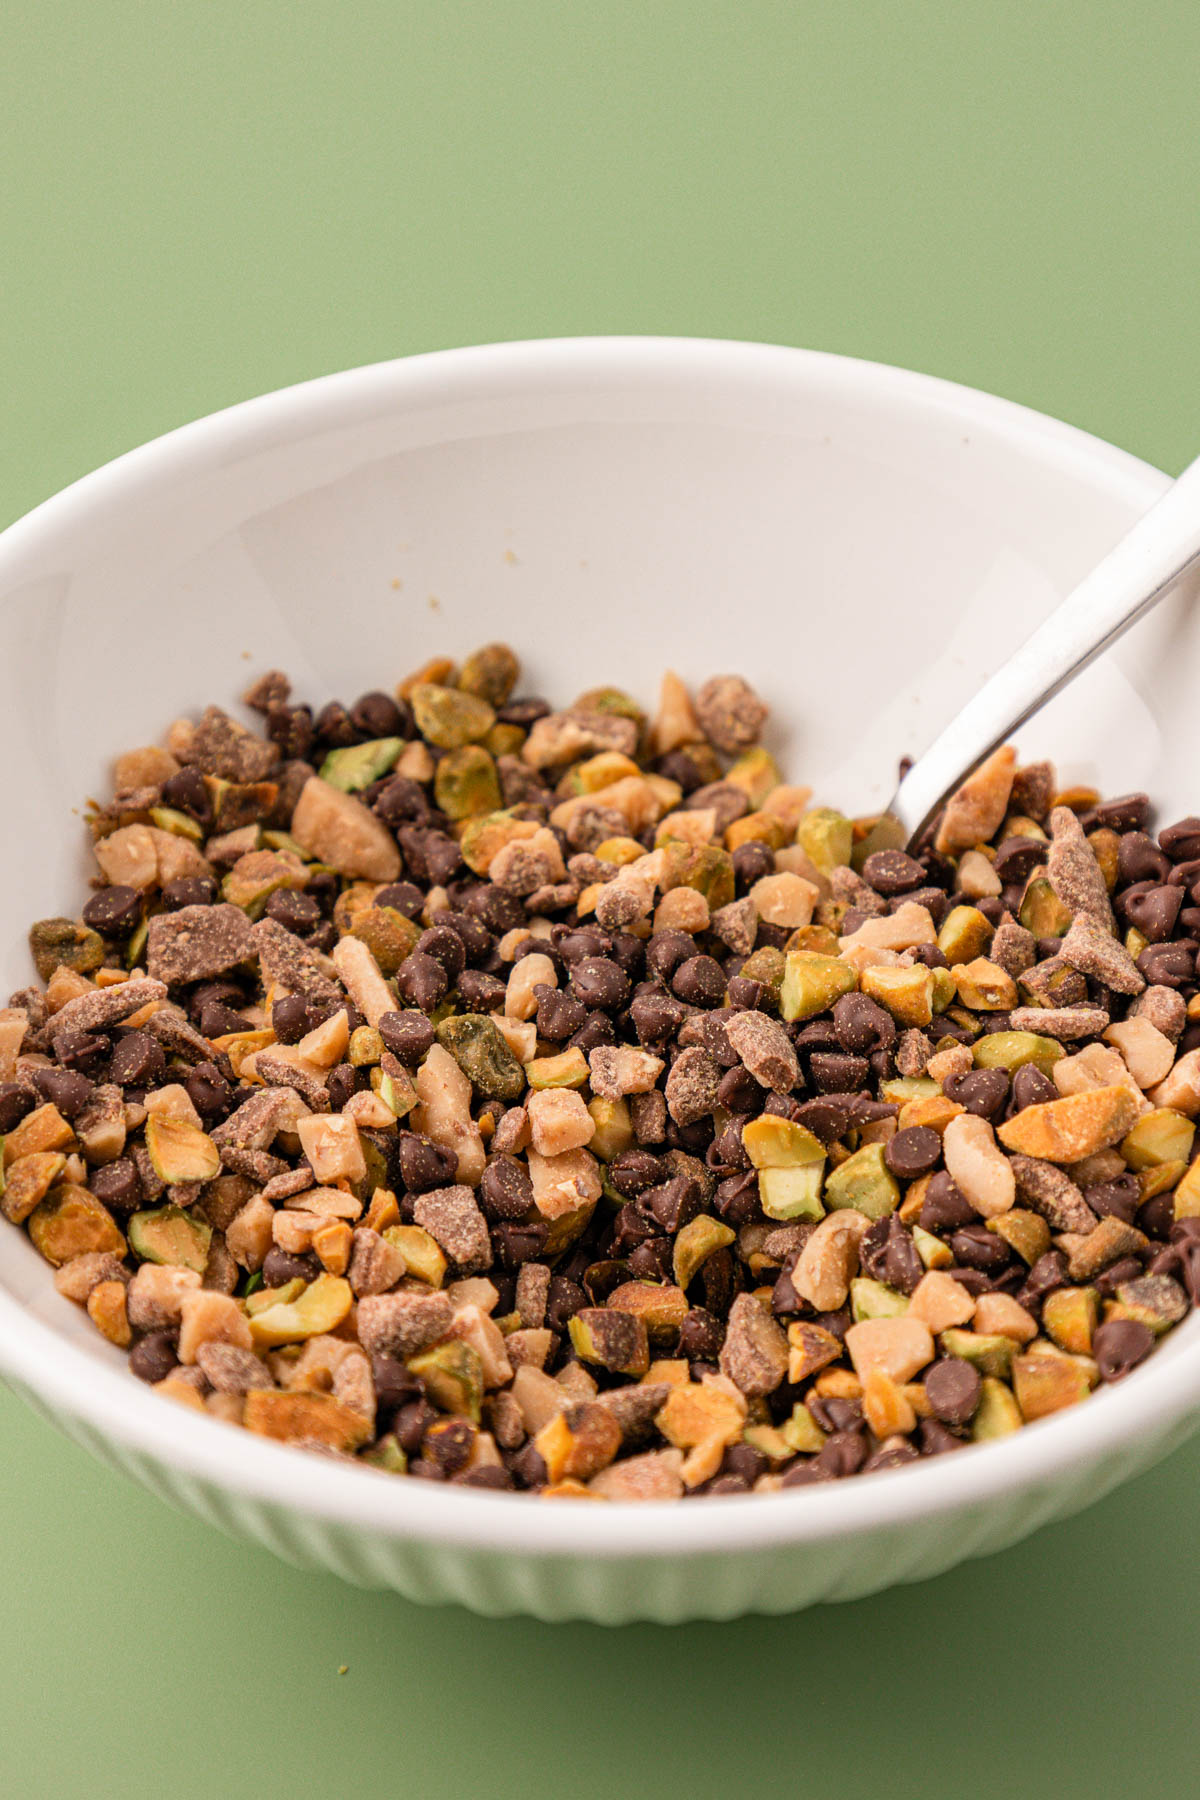 Chocolate chips, pistachios, and toffee mixed together in a white bowl.